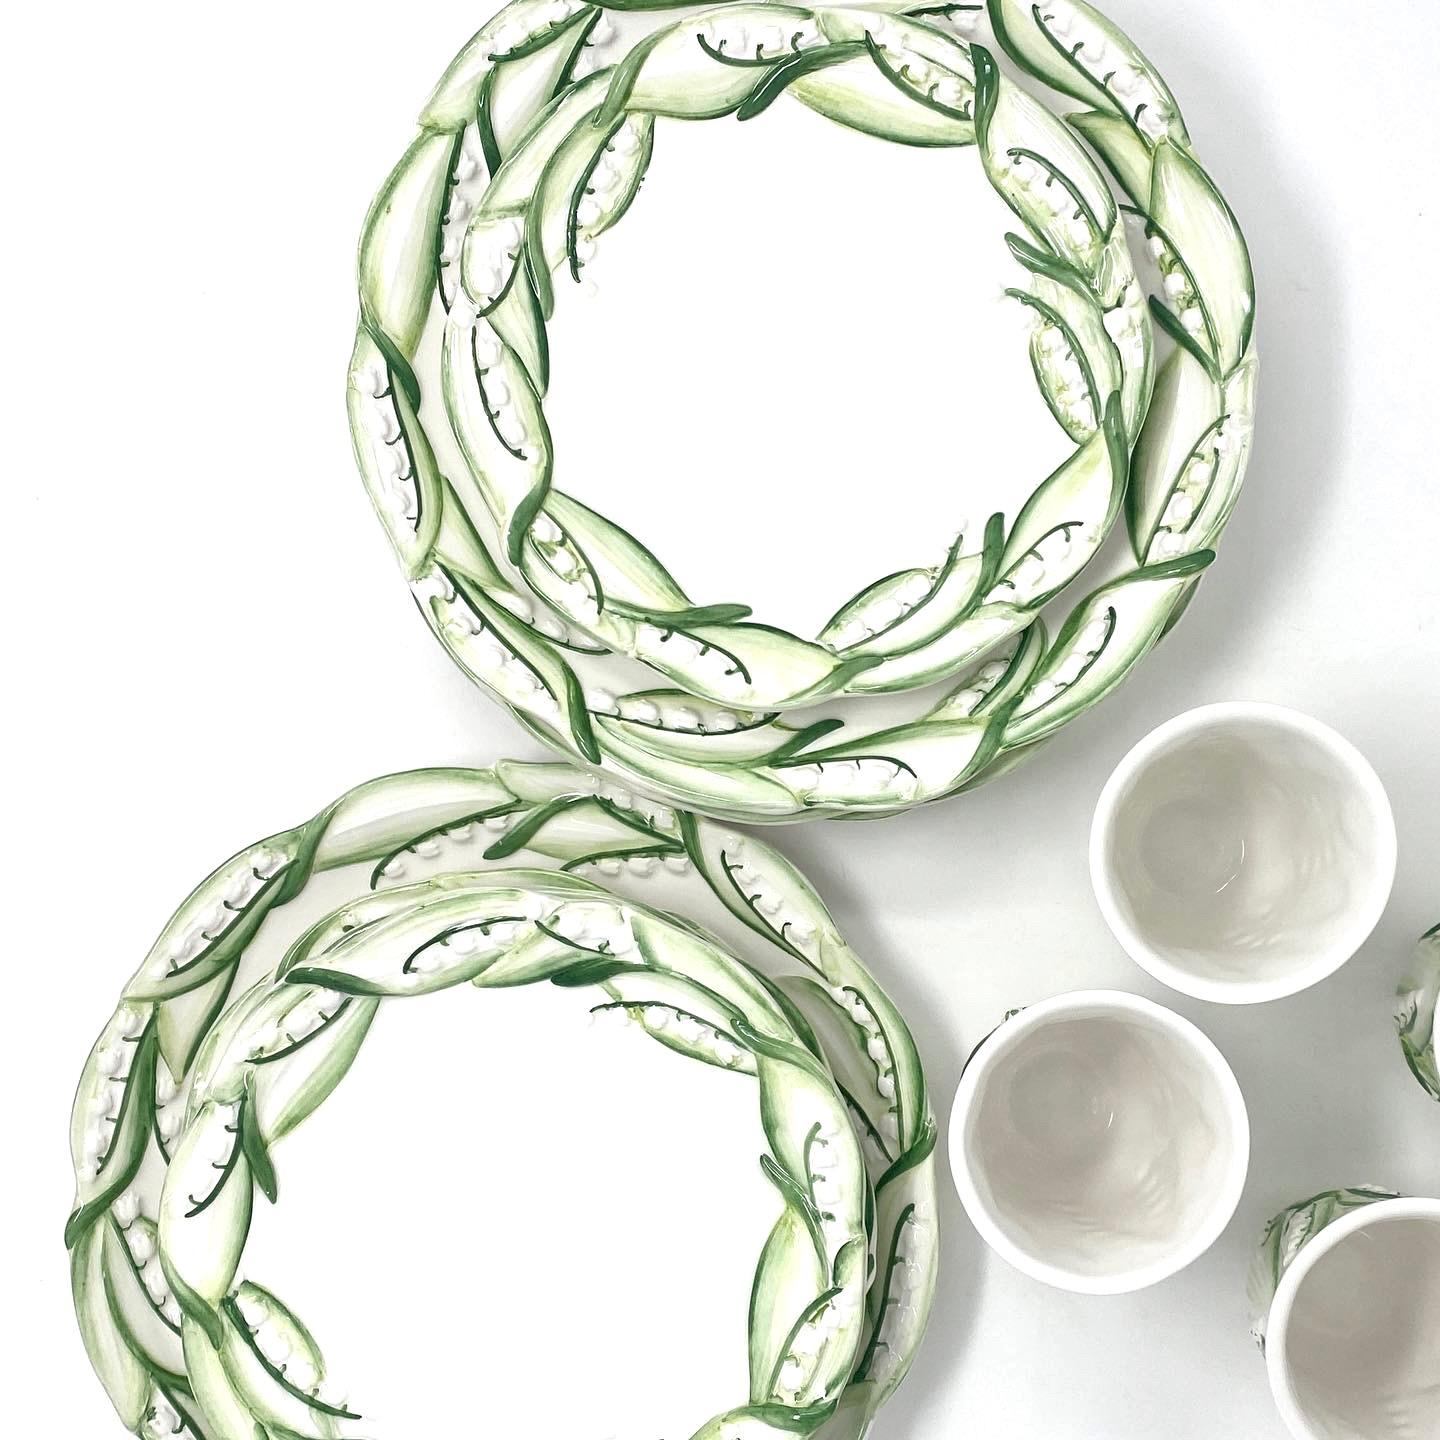 Majolica Lily of the Valley Dessert Plate, Handmade in Italy, Set of 4 for The Mane Lion

The Mane Lion was born in 1979 in the heart of Philadelphia's fabled Main Line, offering a line of charming, hand-painted chip-and-dip serving pieces that